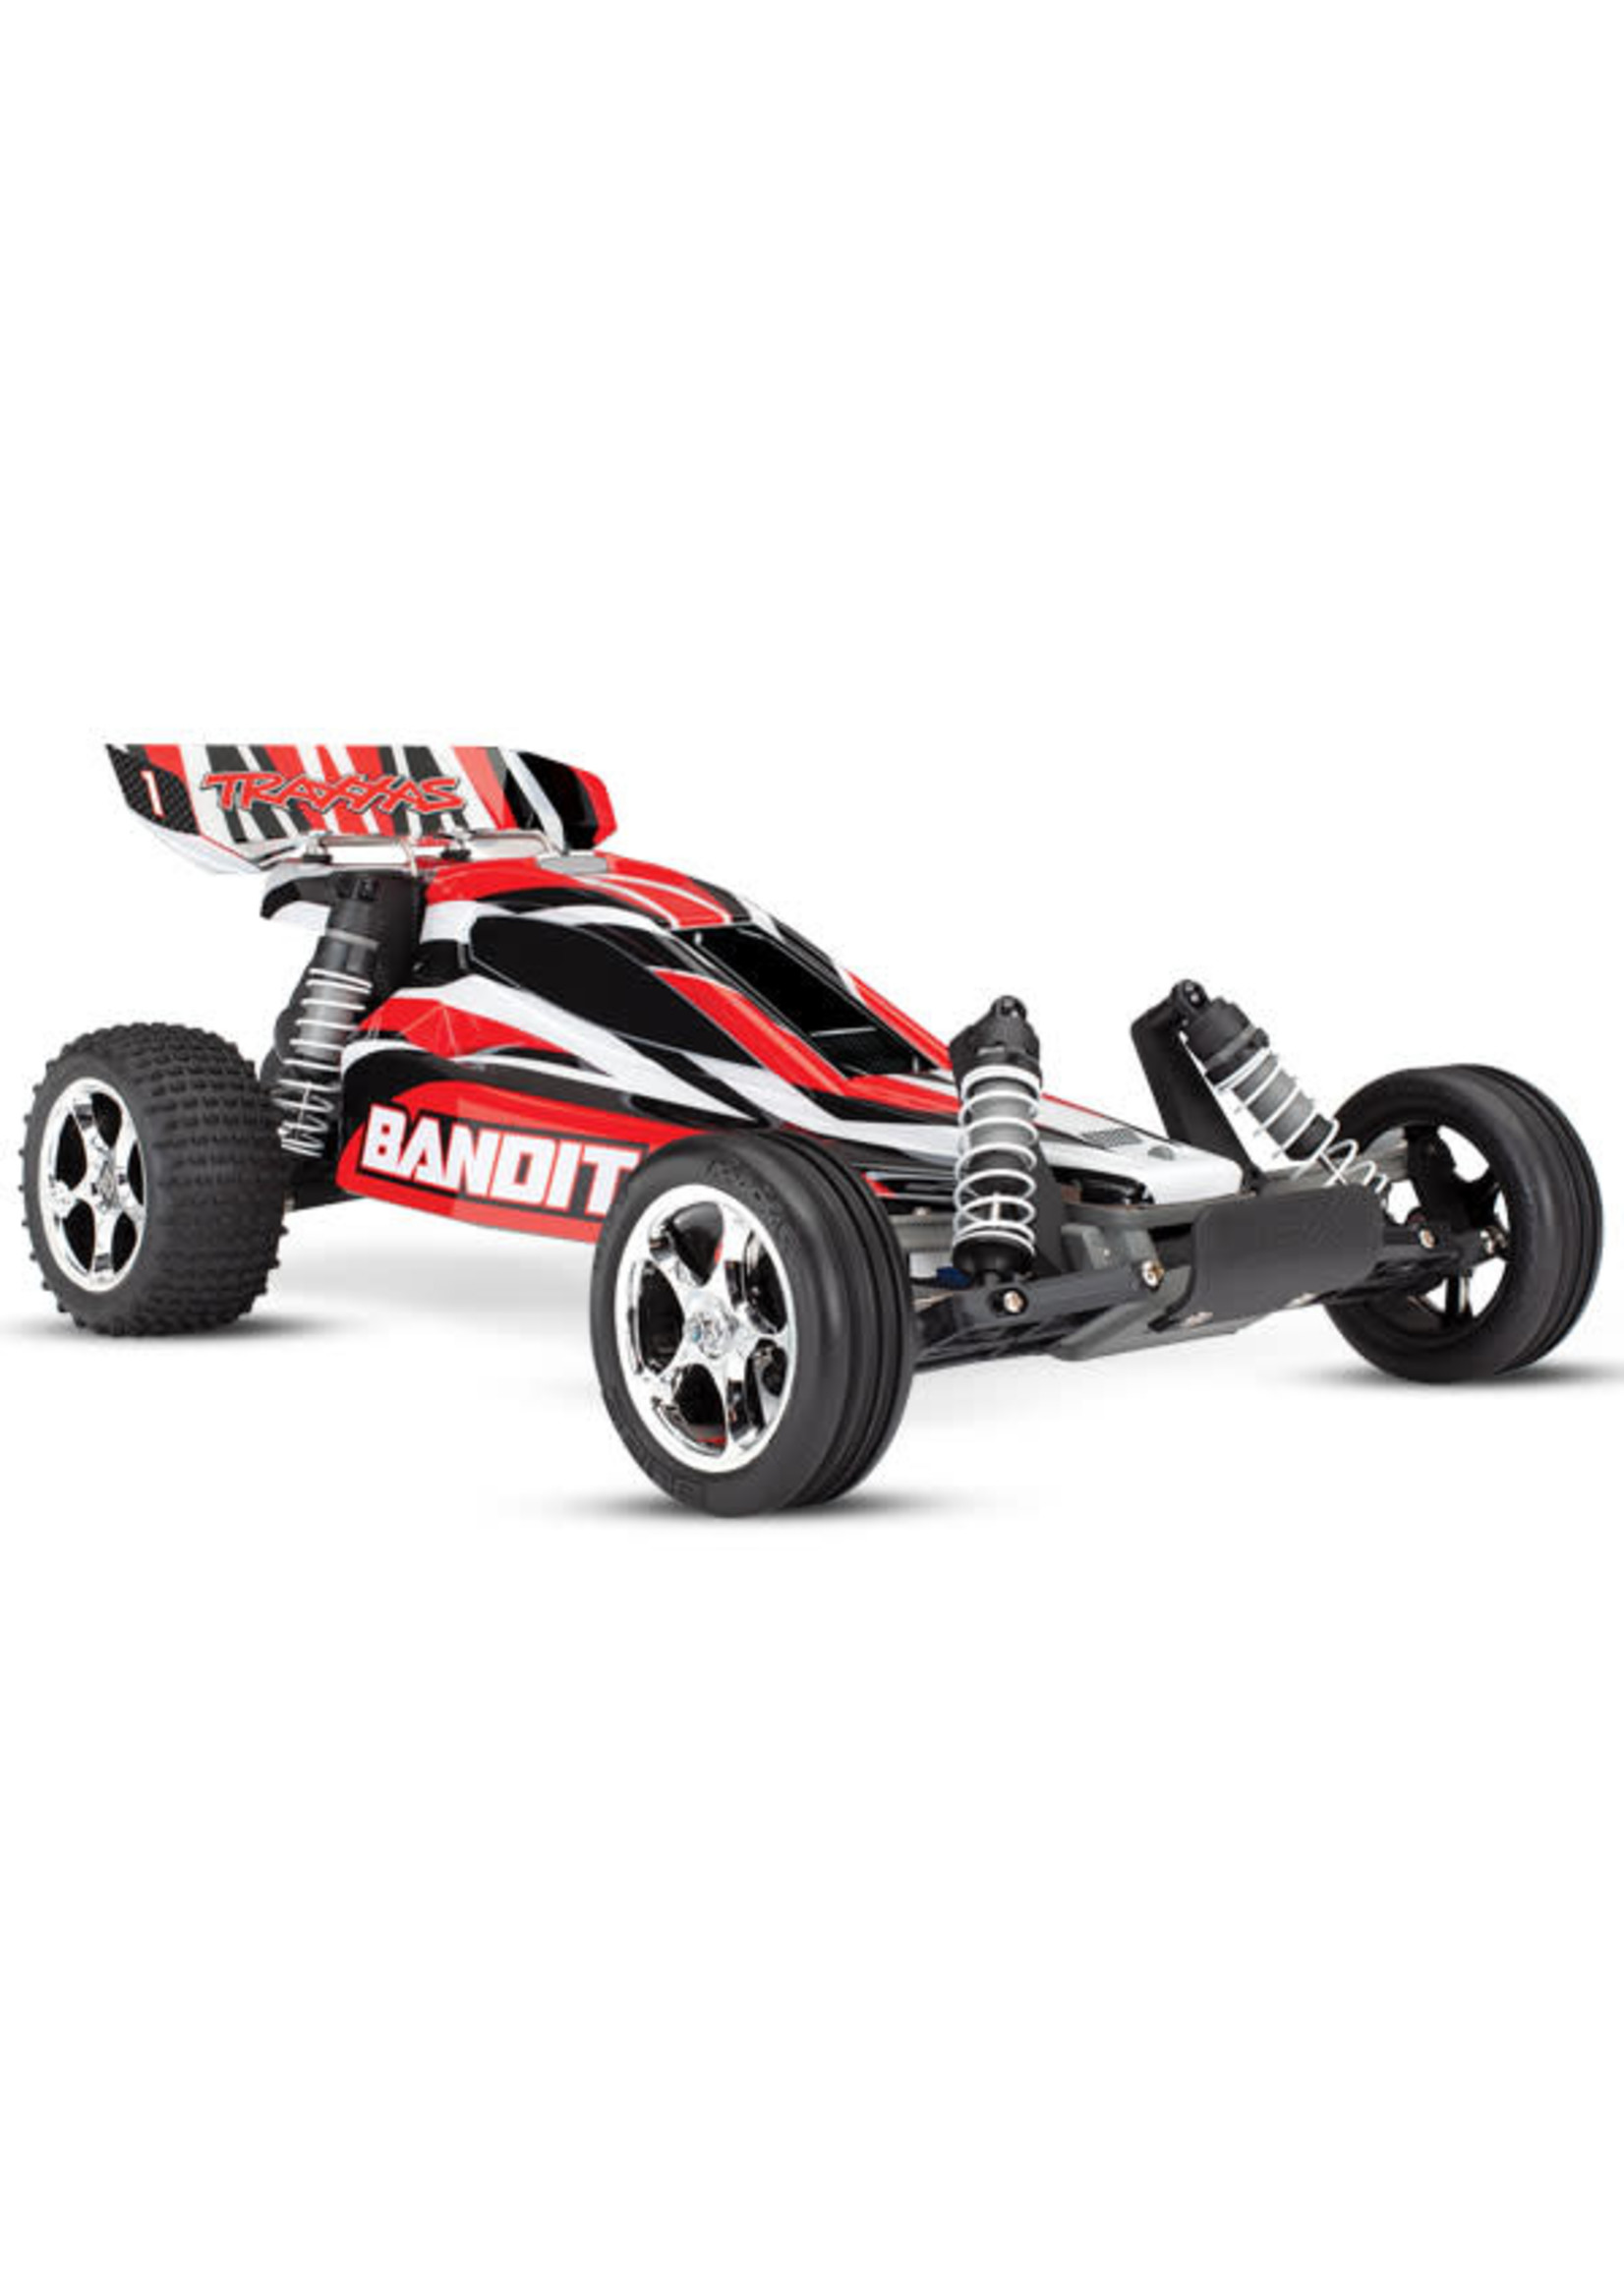 Traxxas 24054-4-RED Bandit: 1/10 Scale Off-Road Buggy with TQ 2.4GHz radio system